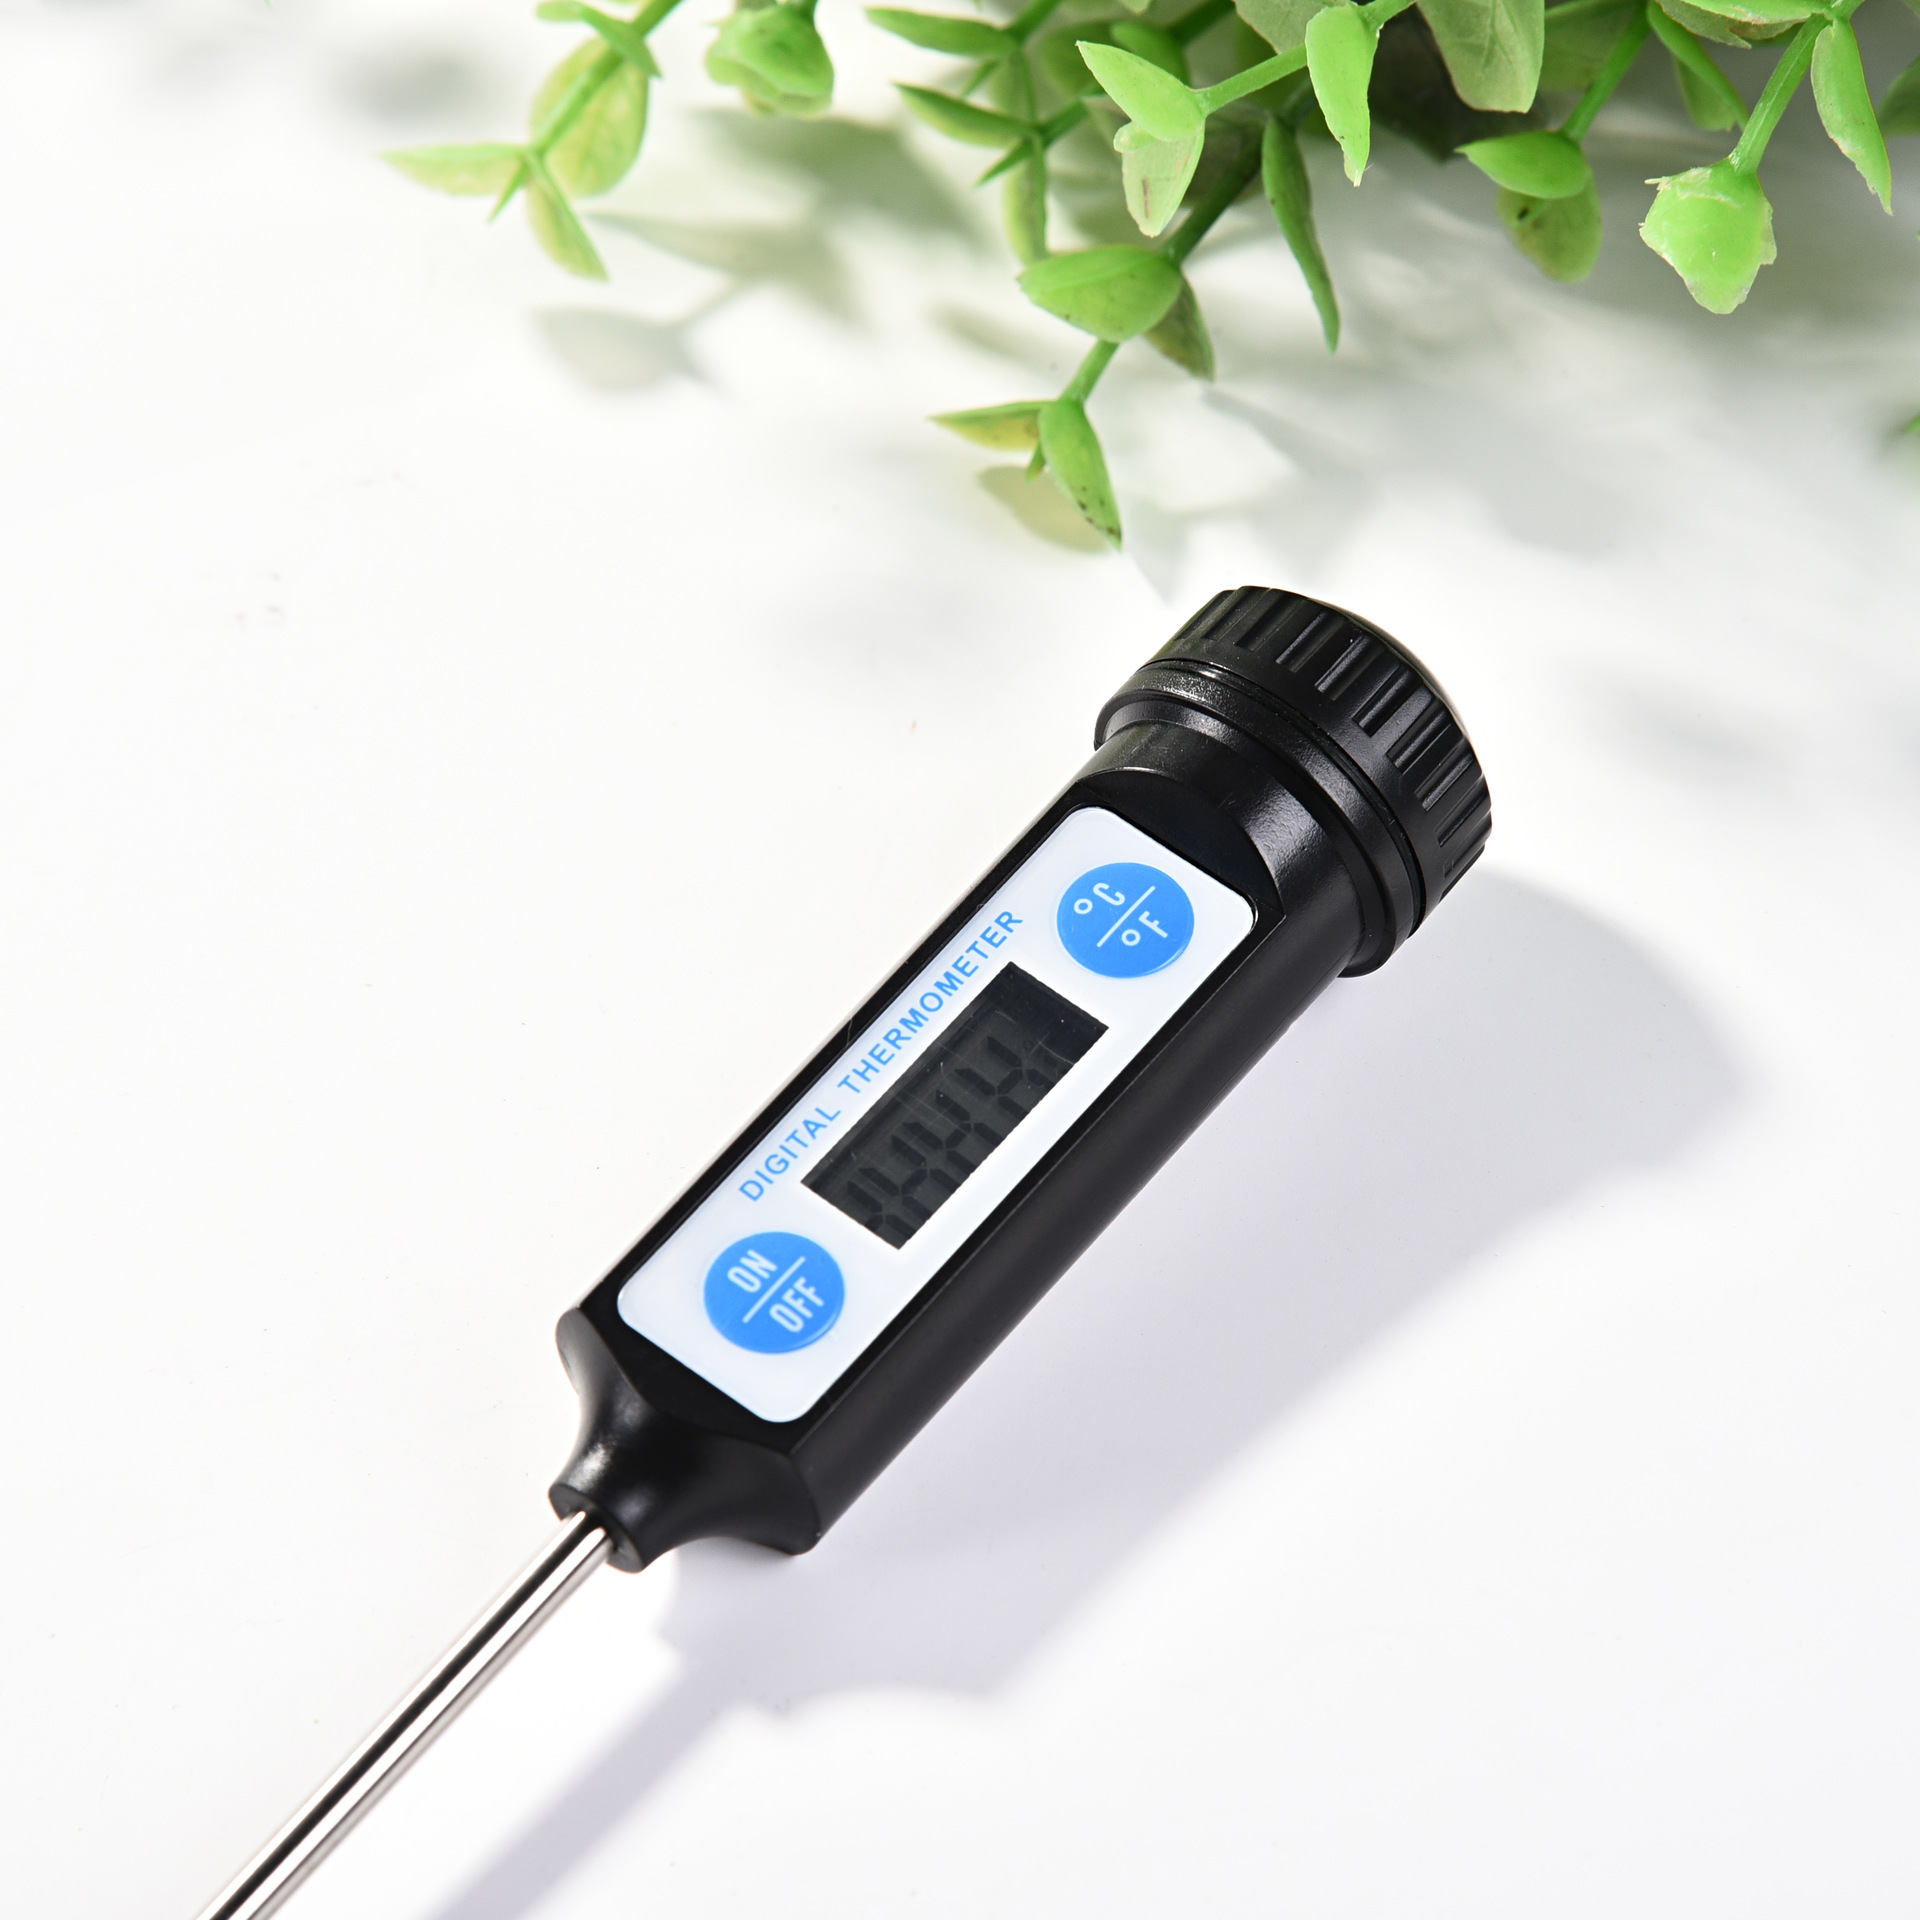 Digital Food Thermometer Temperature Probe Meat Cooking Jam Sugar BBQ NEW  P7